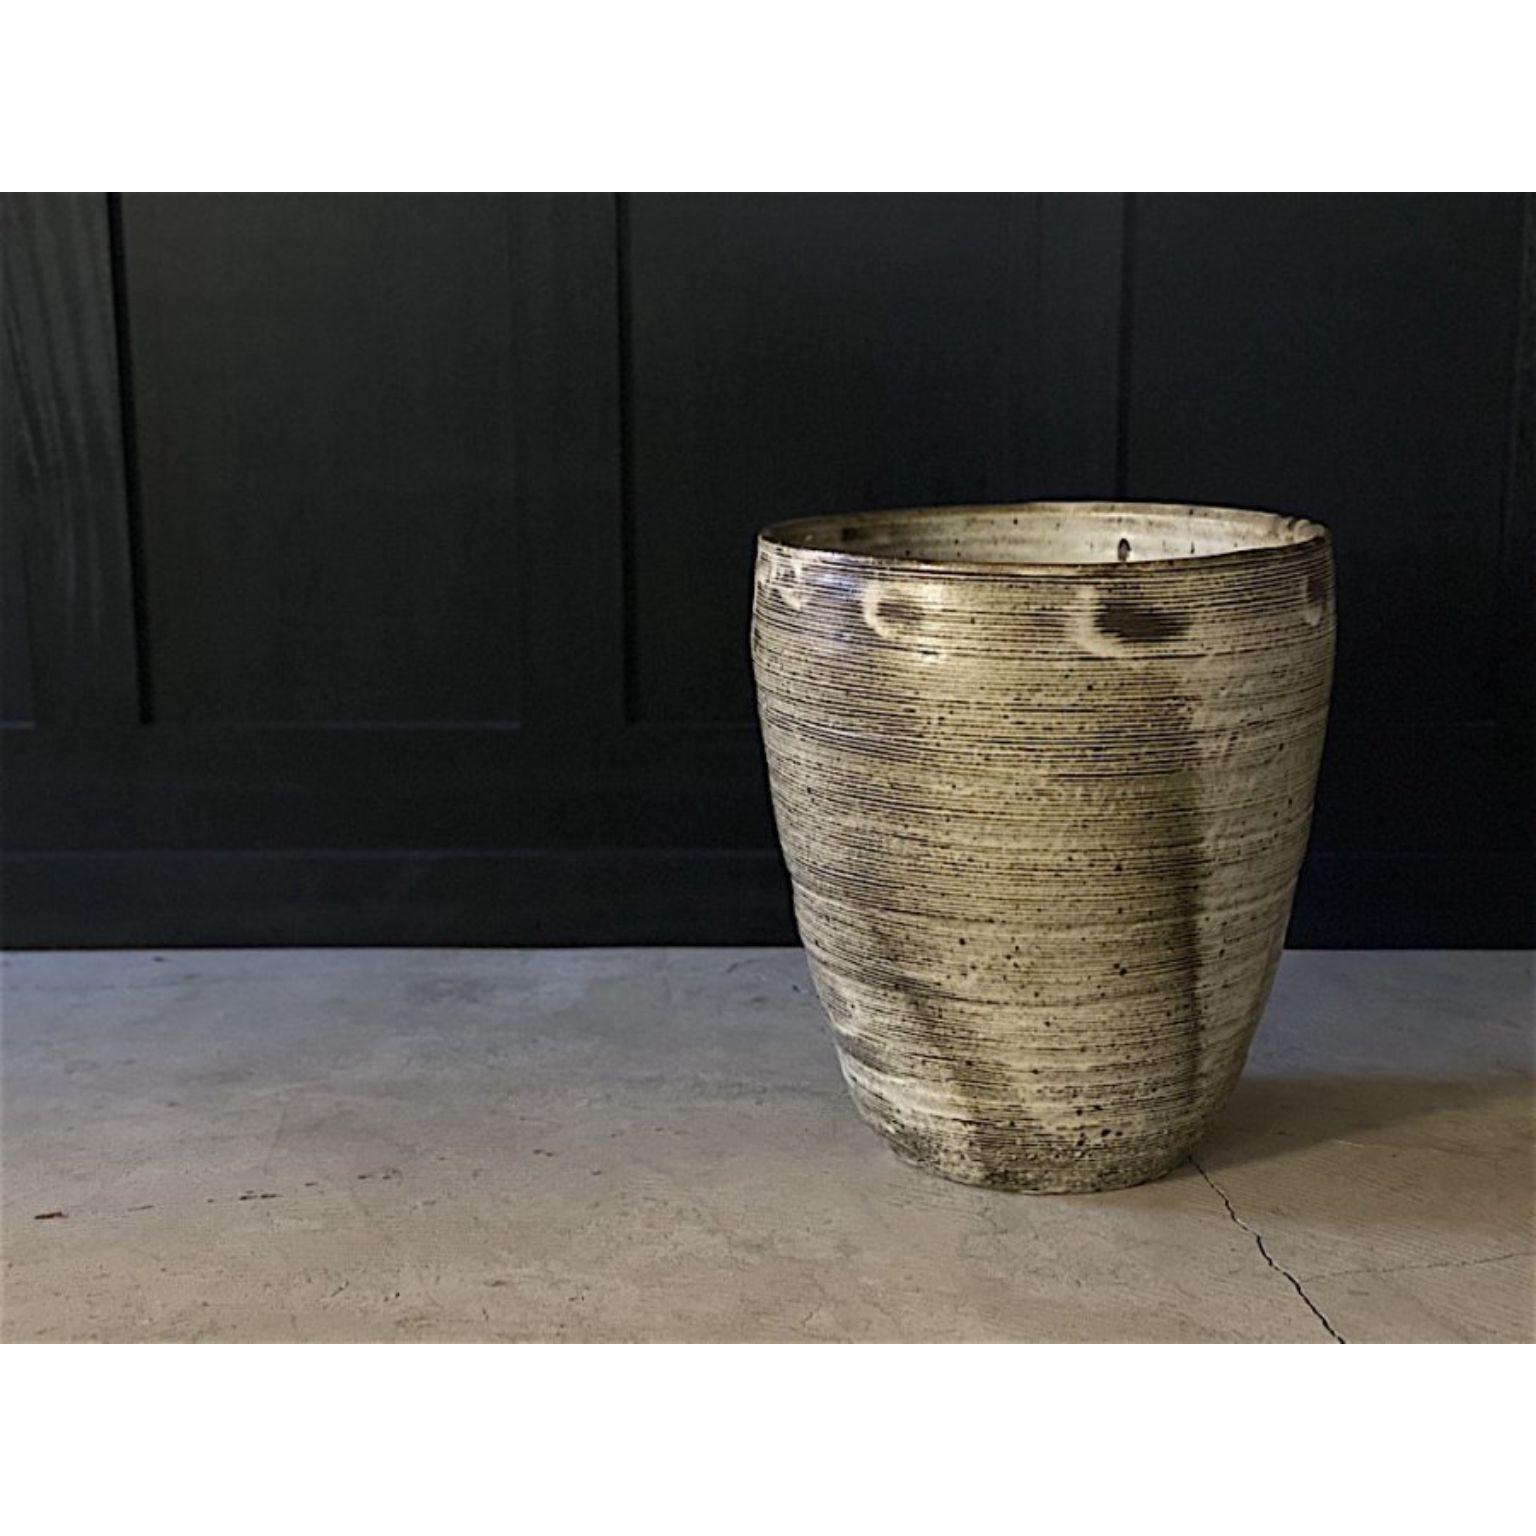 Japanese Handcrafted Vase #2 by Teppei Ono